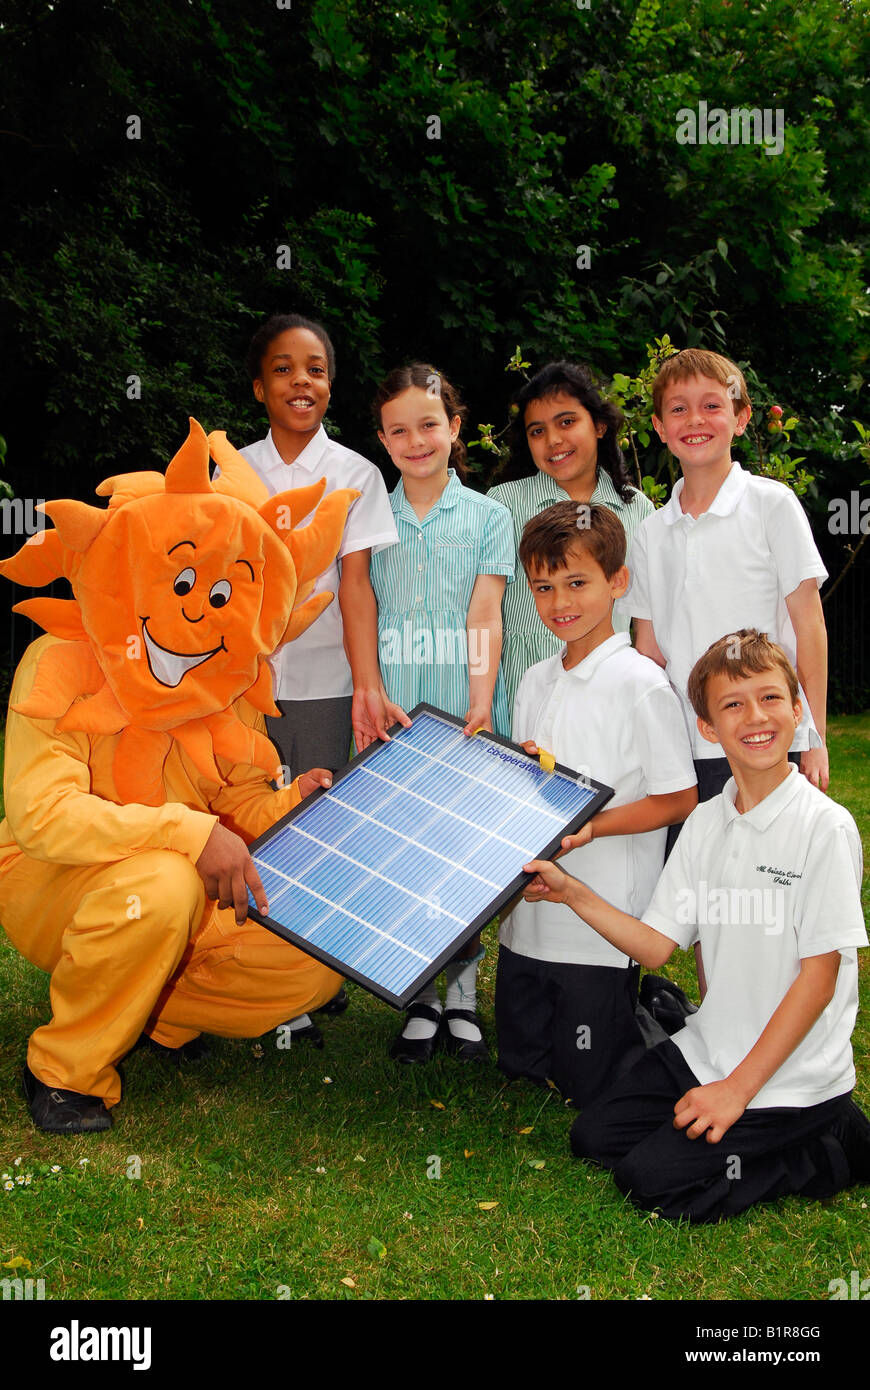 Primary school pupils delight in having solar panels installed at their school All Saints Primary School Fulham London Stock Photo